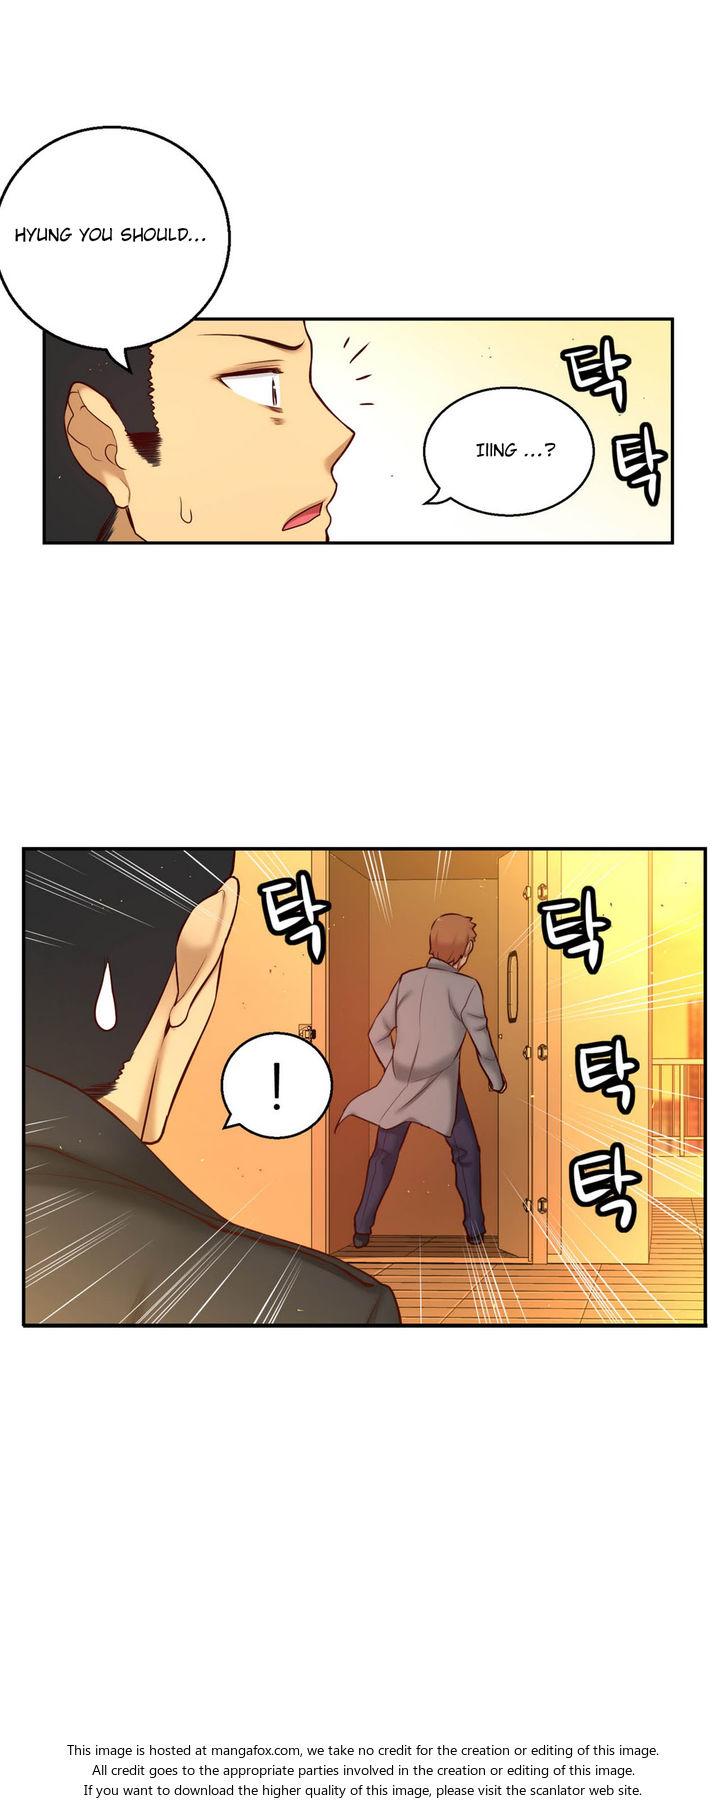 [Donggul Gom] She is Young (English) Part 1/2 1495